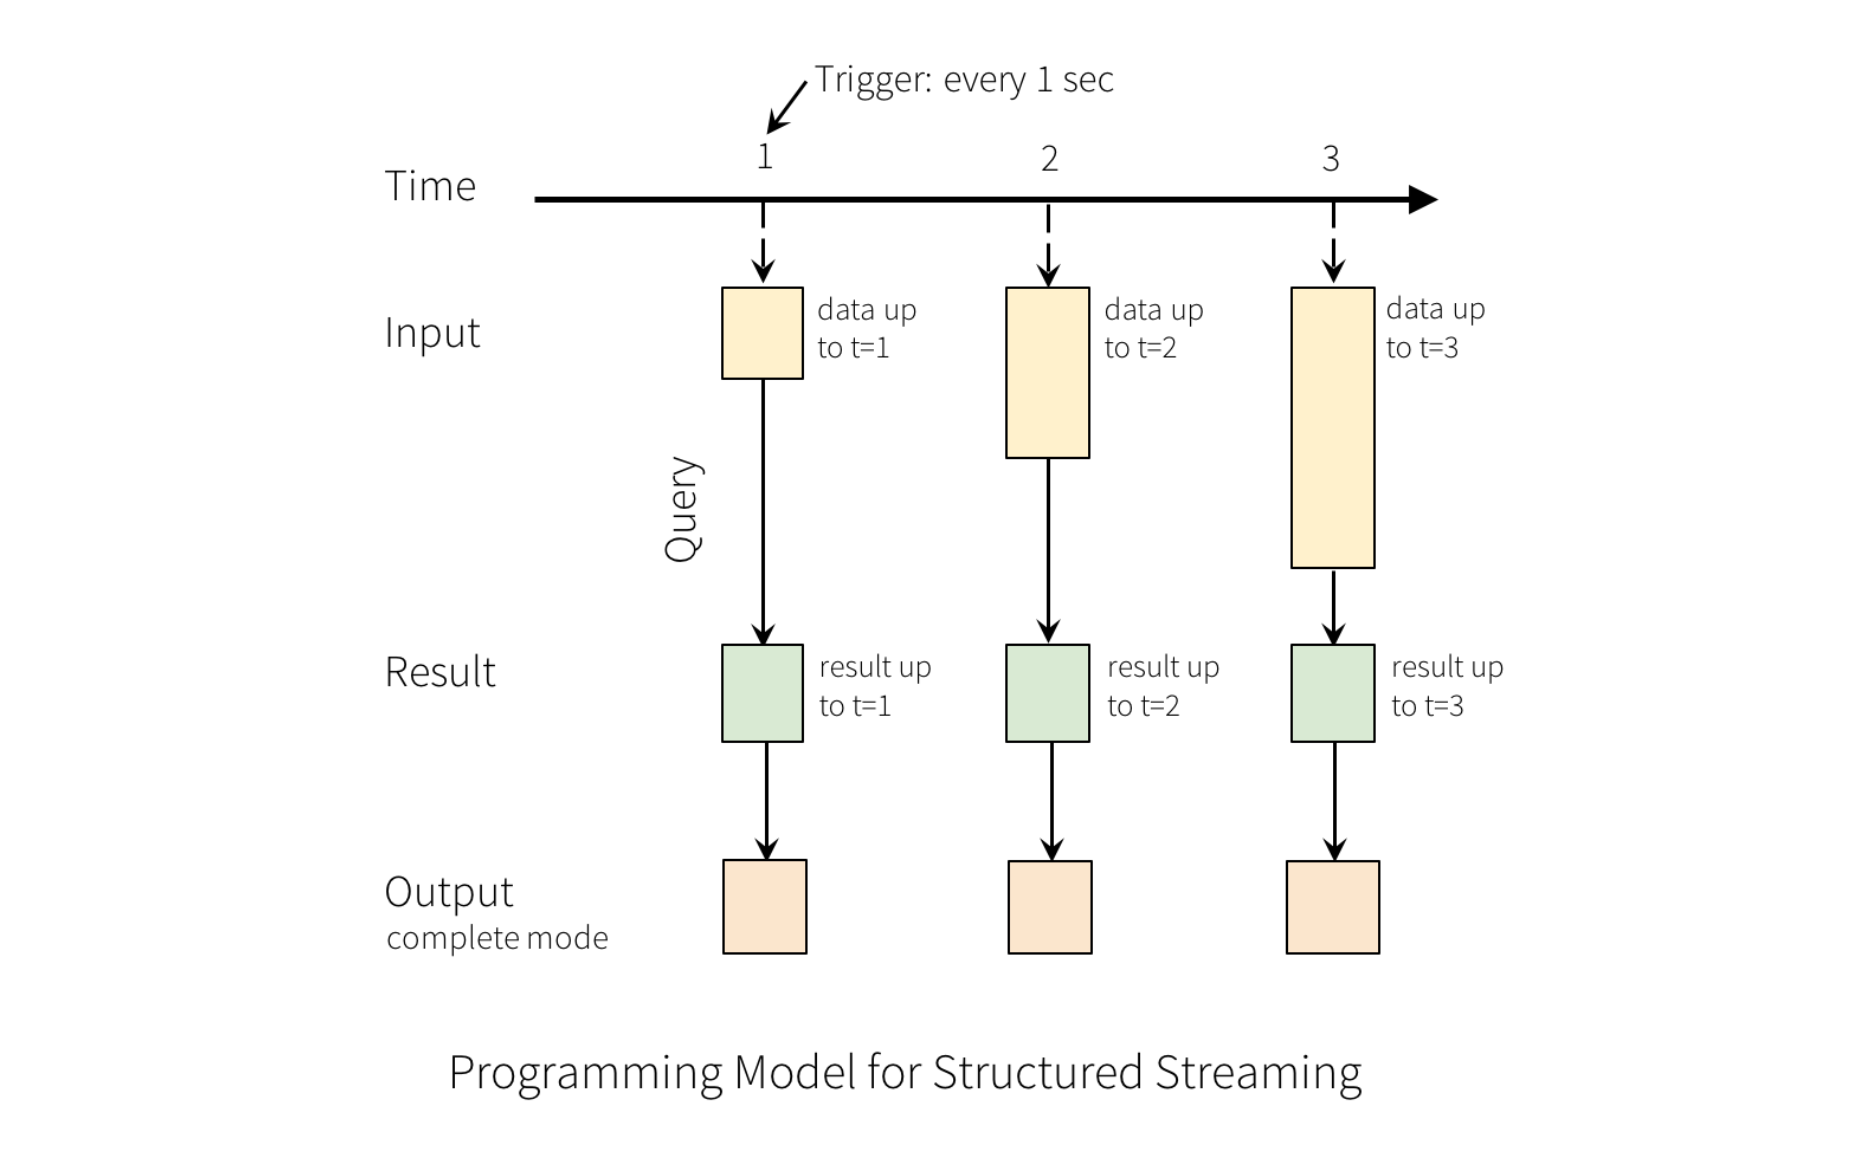 Structured Streaming model